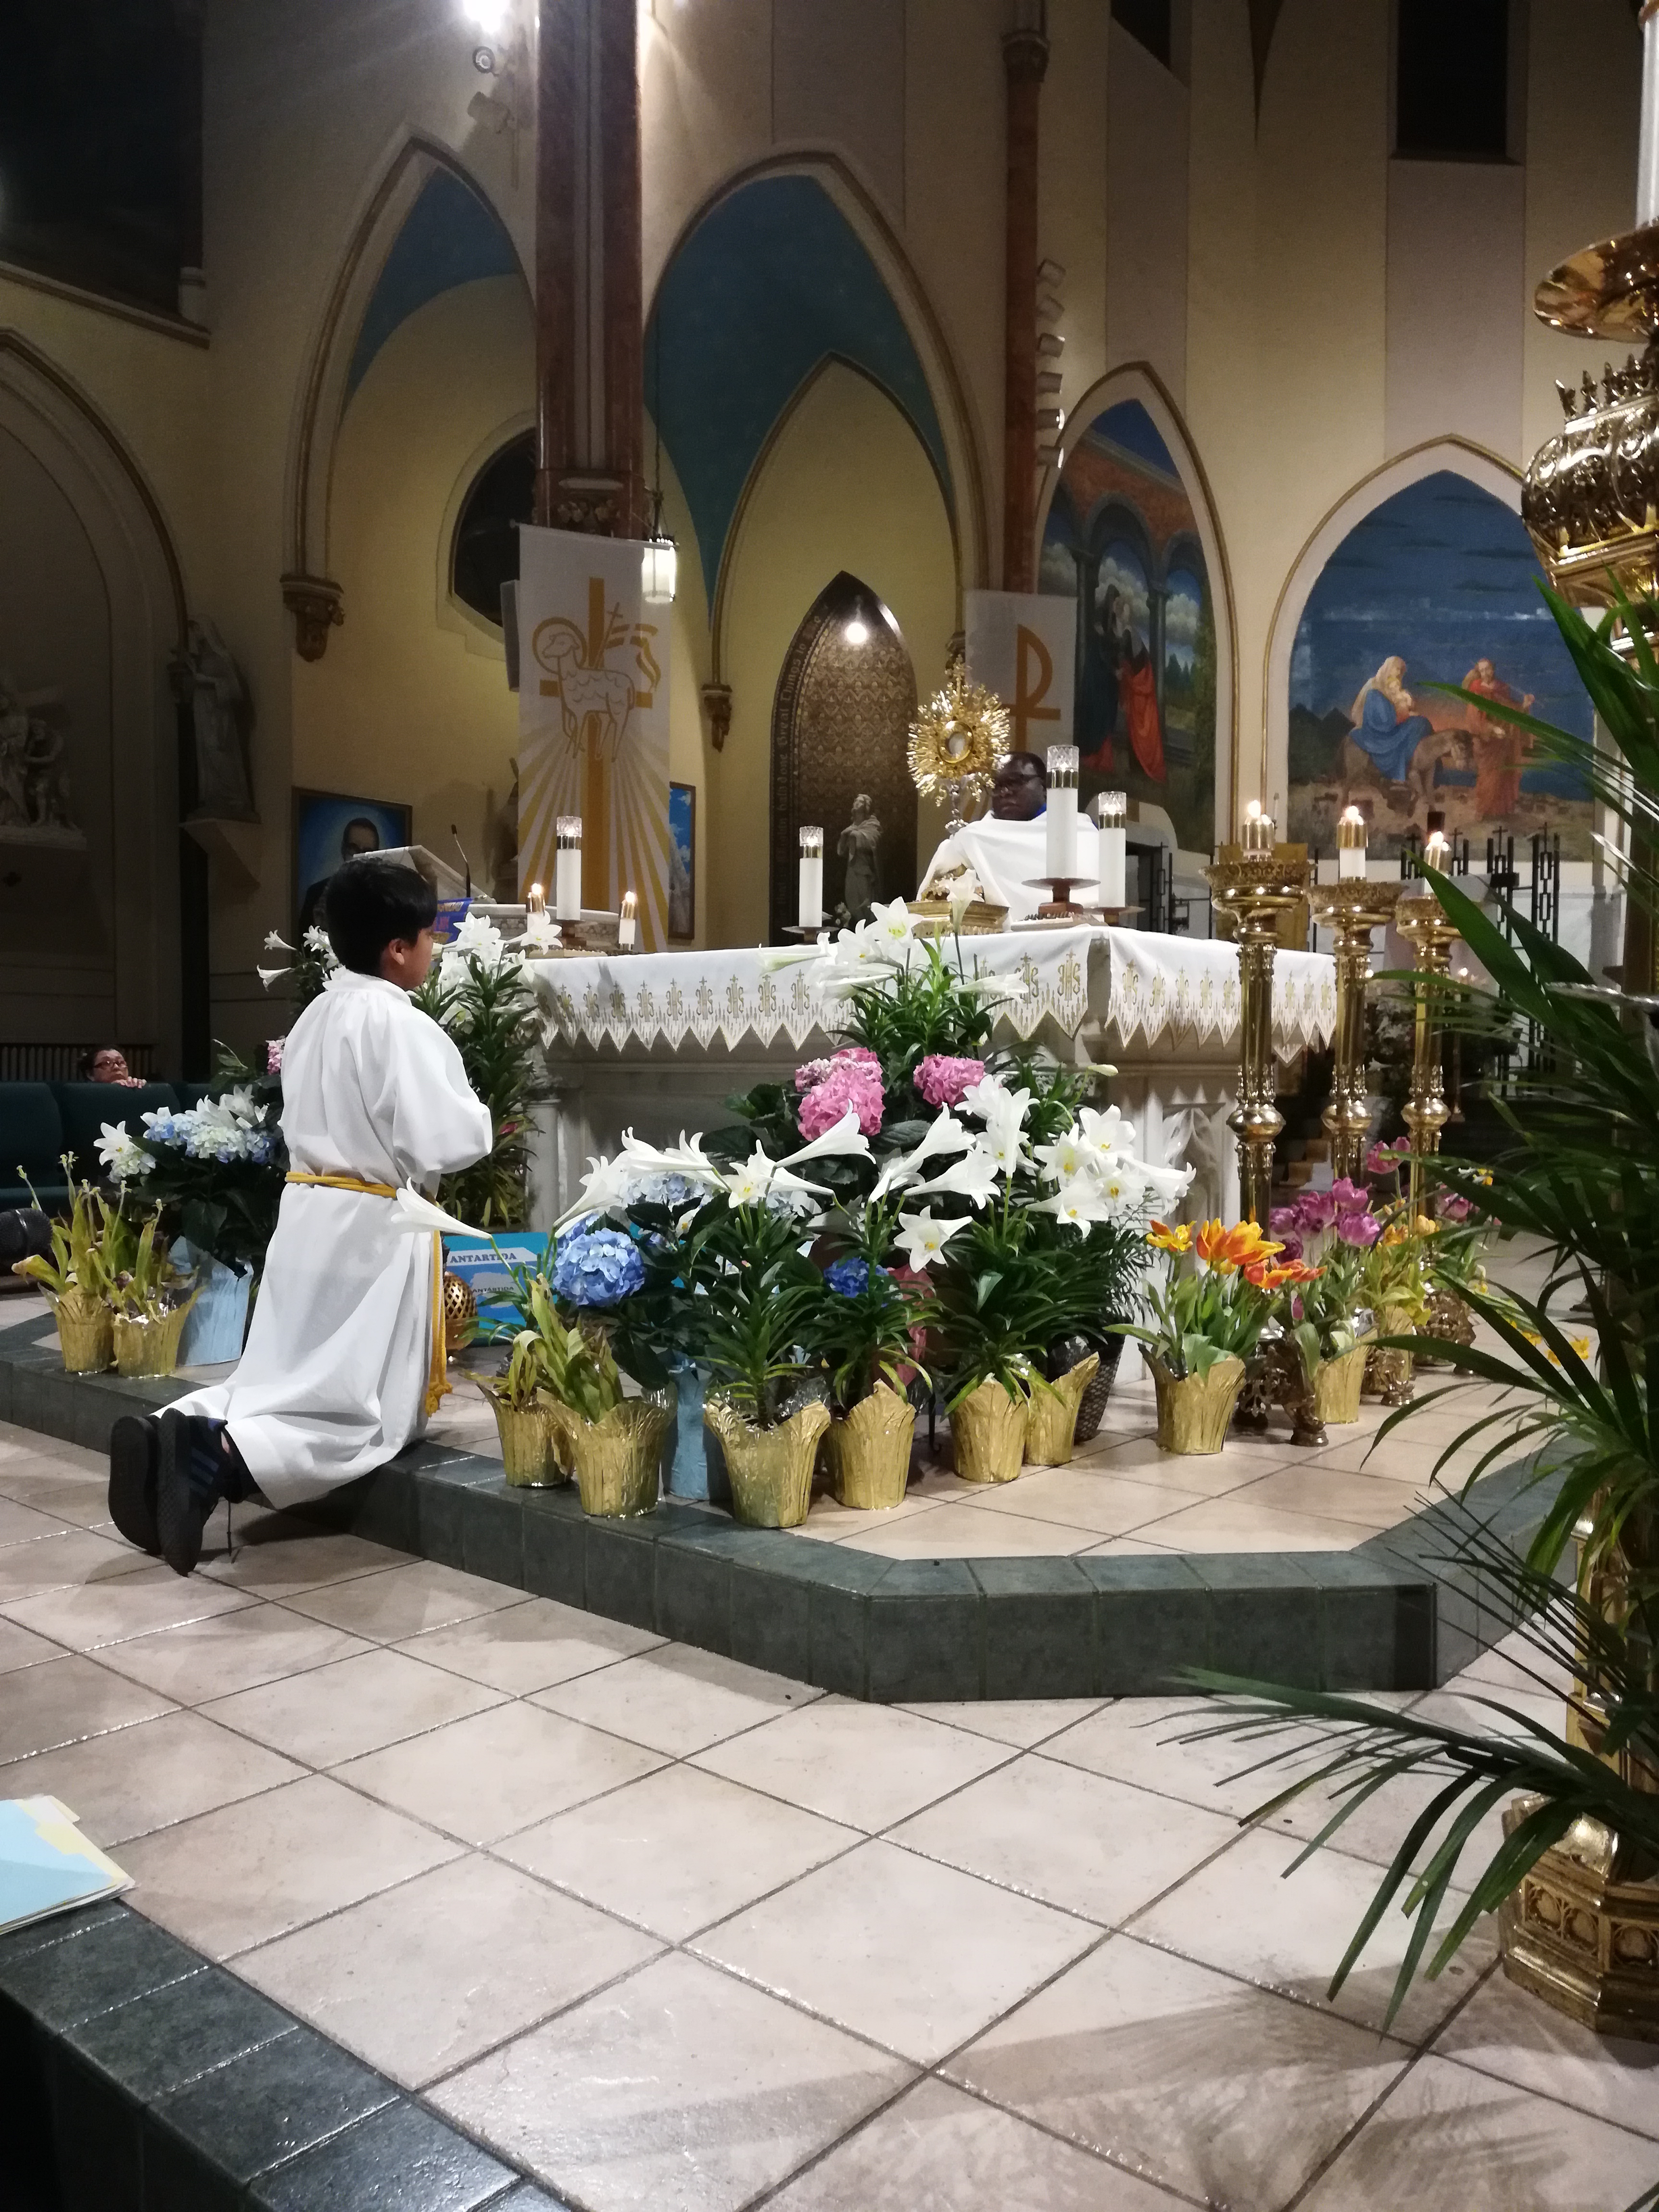 A person kneeling down in front of a church altar.